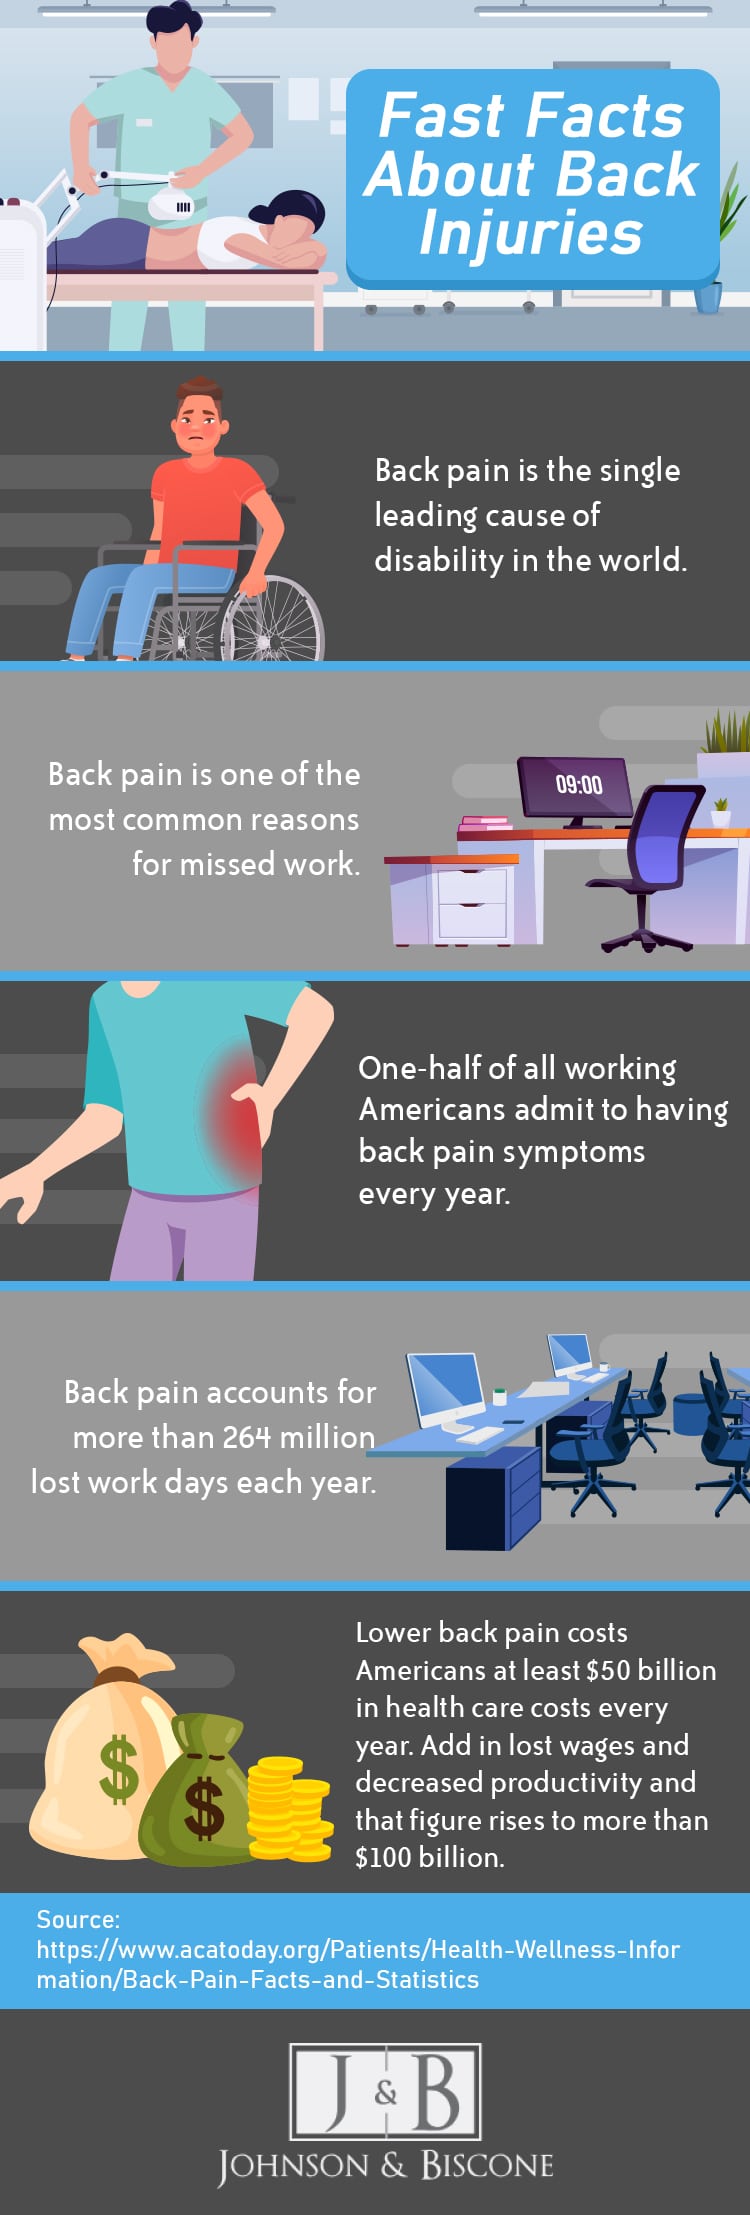 Fast facts about back injuries